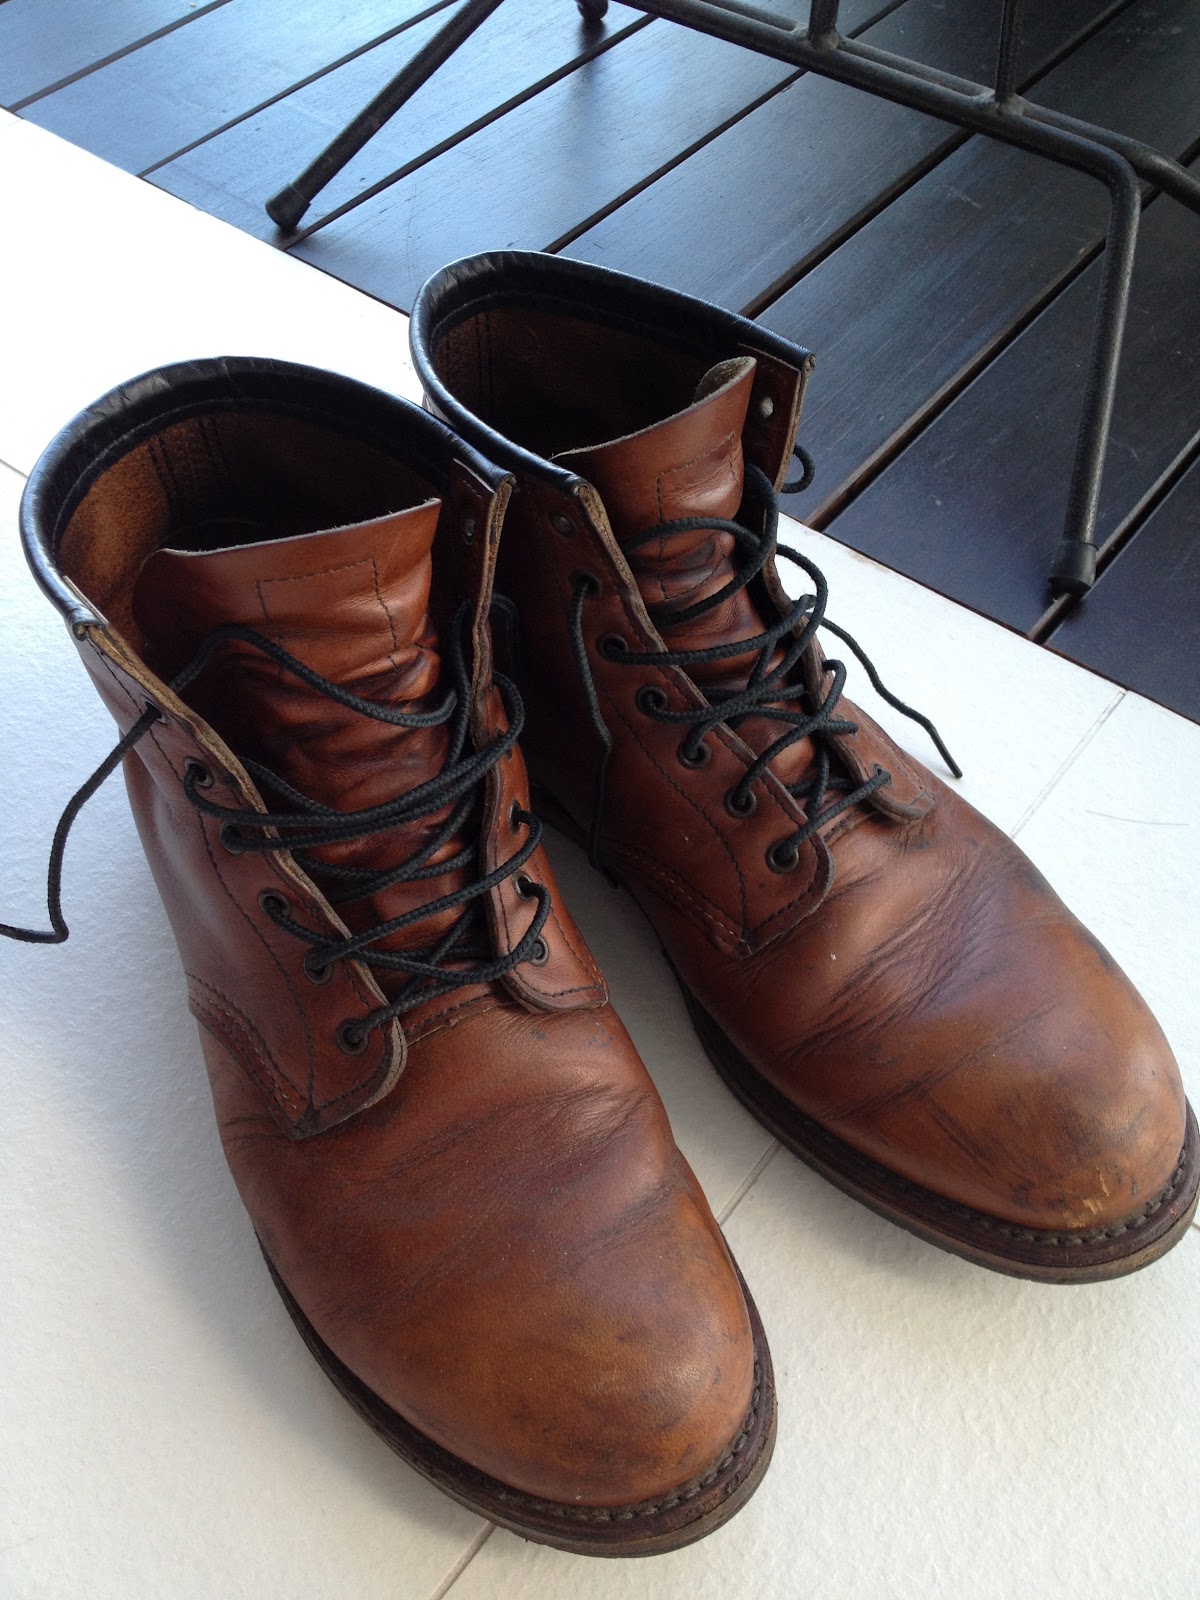 Goody Leathery: Dirty Red Wing Beckman Chestnut 9013 + Evolution